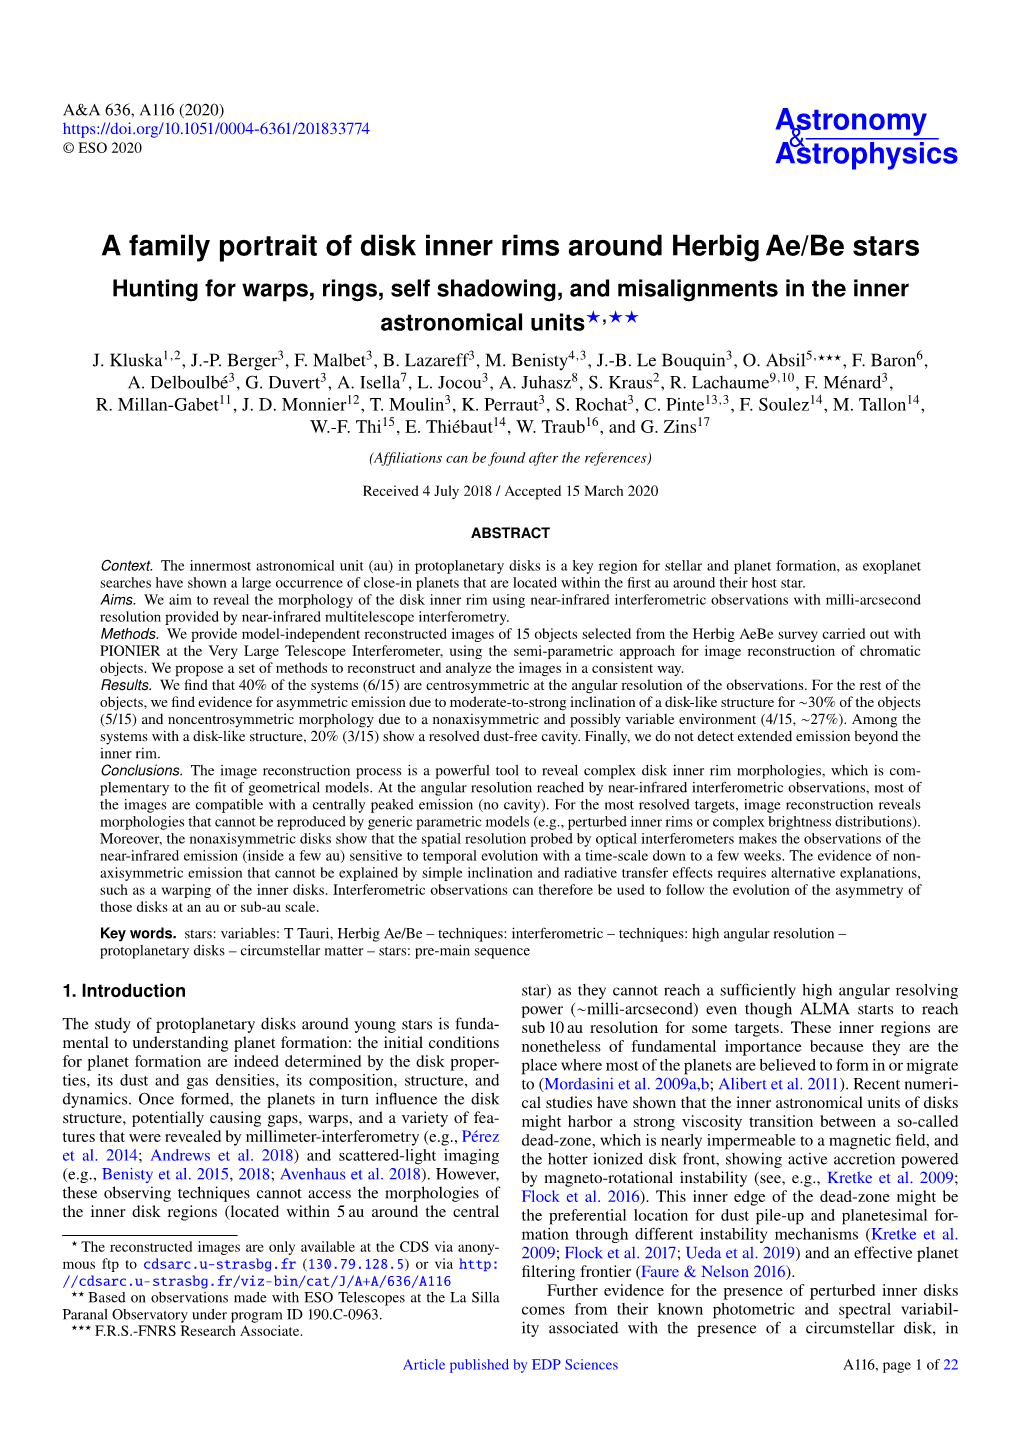 A Family Portrait of Disk Inner Rims Around Herbig Ae/Be Stars Hunting for Warps, Rings, Self Shadowing, and Misalignments in the Inner Astronomical Units?,?? J